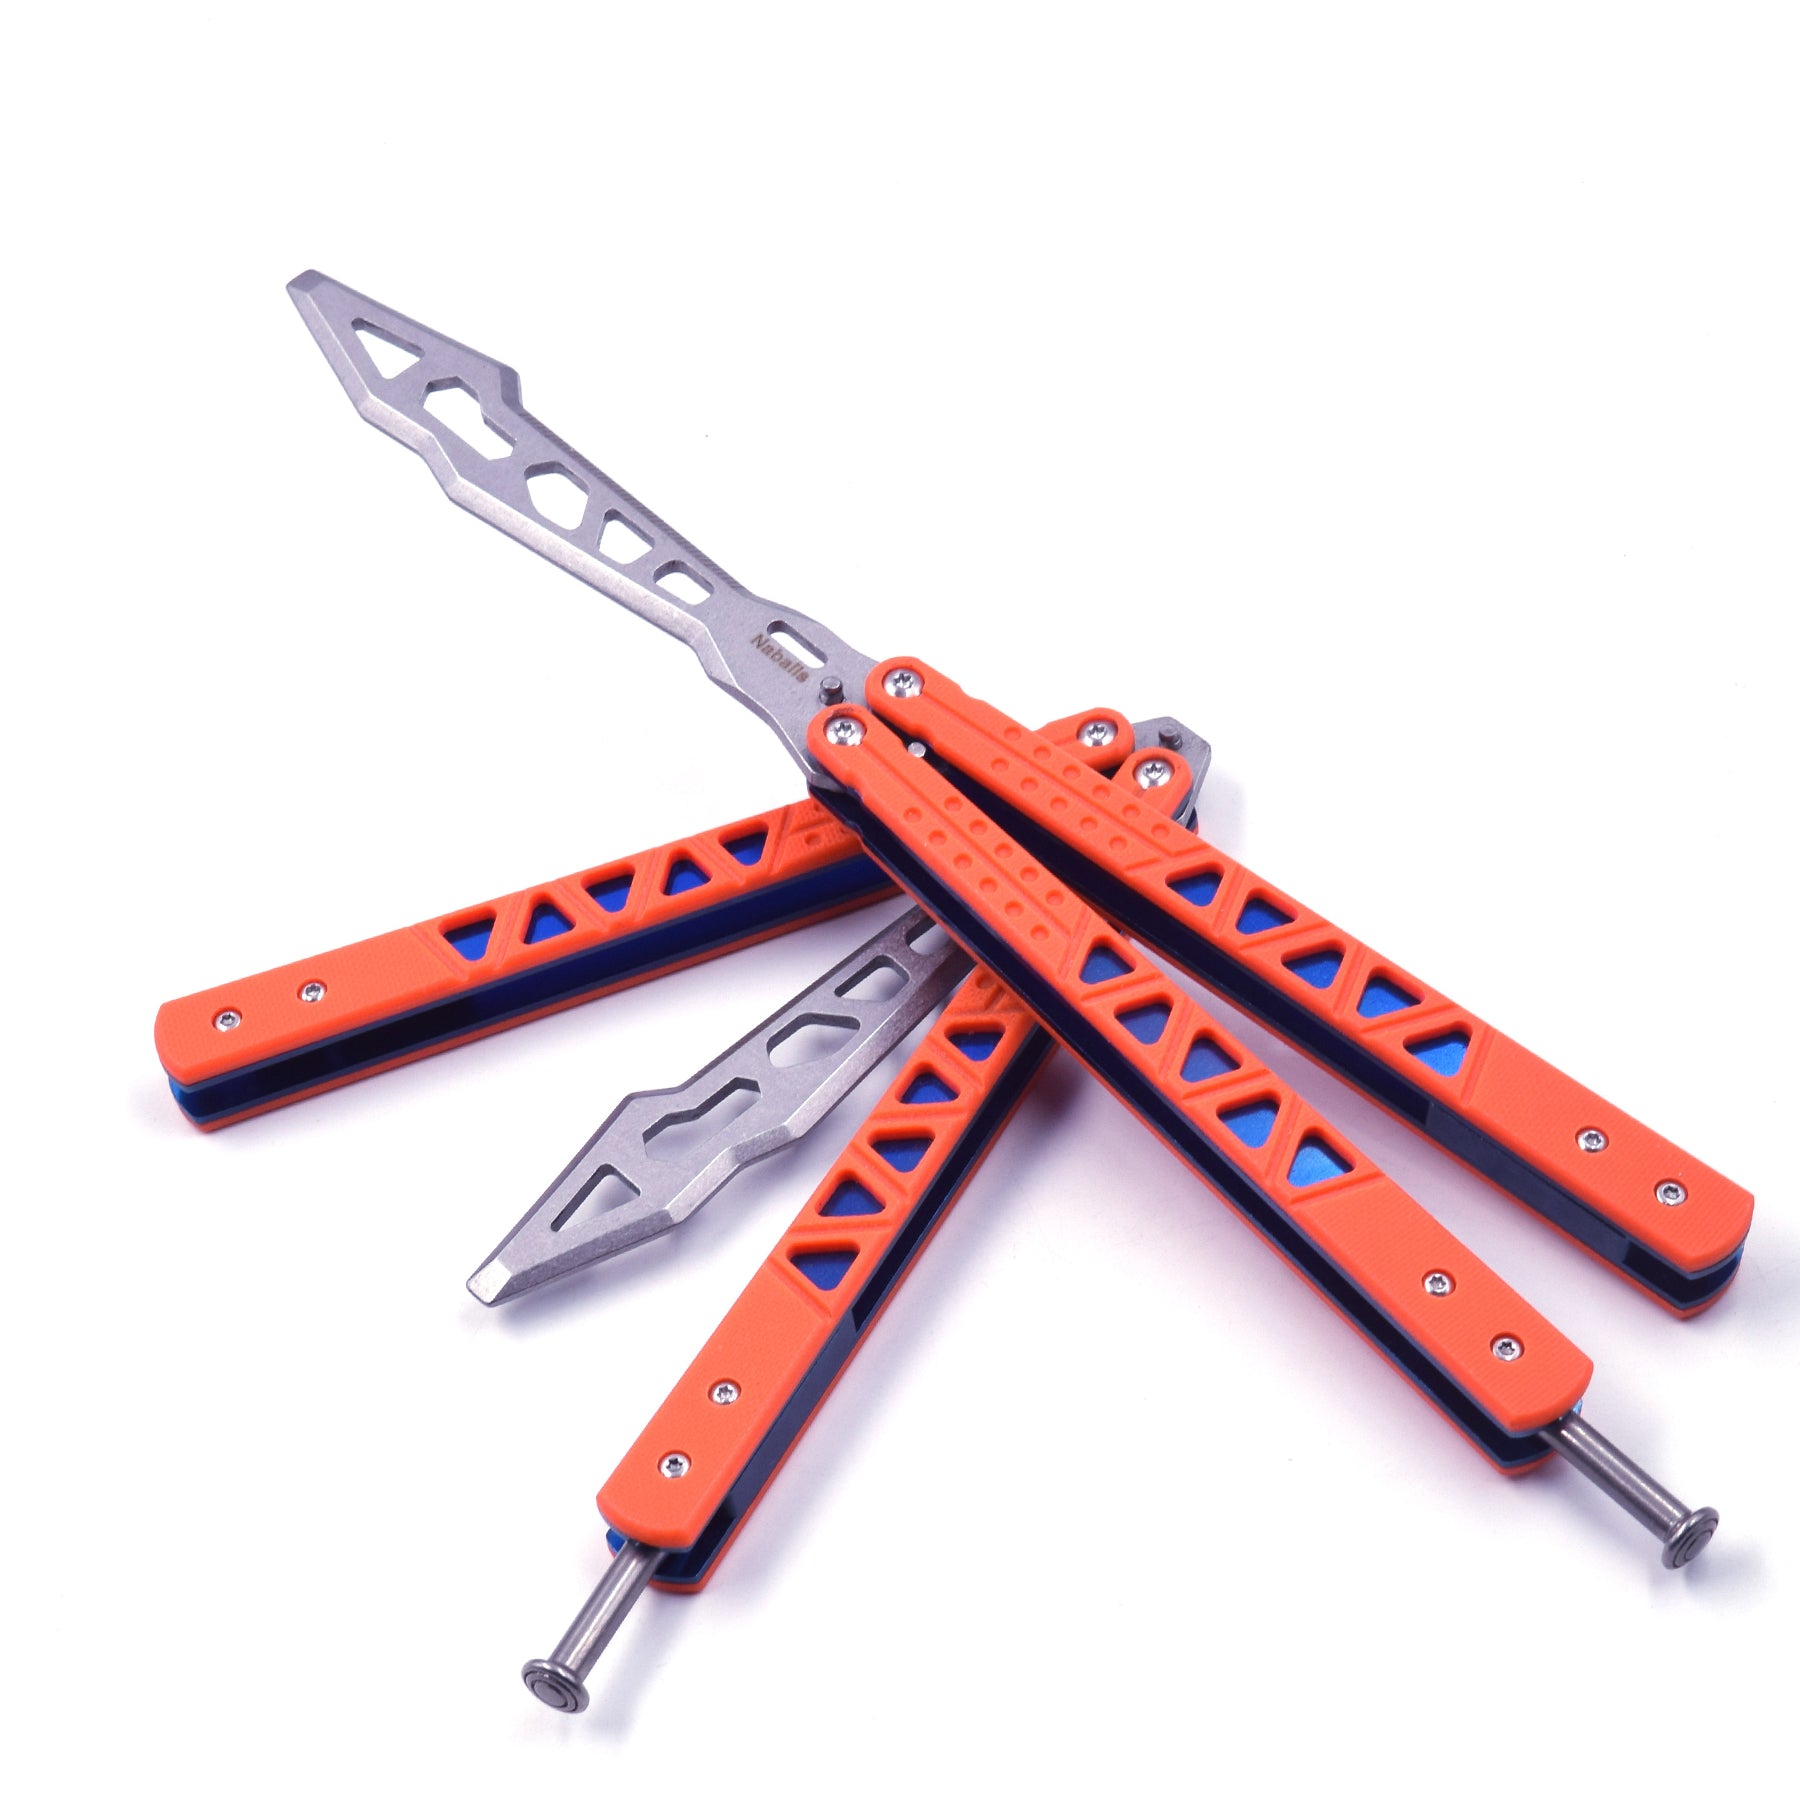 Nabalis G10 Balisong Butterfly Knife Trainer-Lightweight-Orange-Opne and Closed